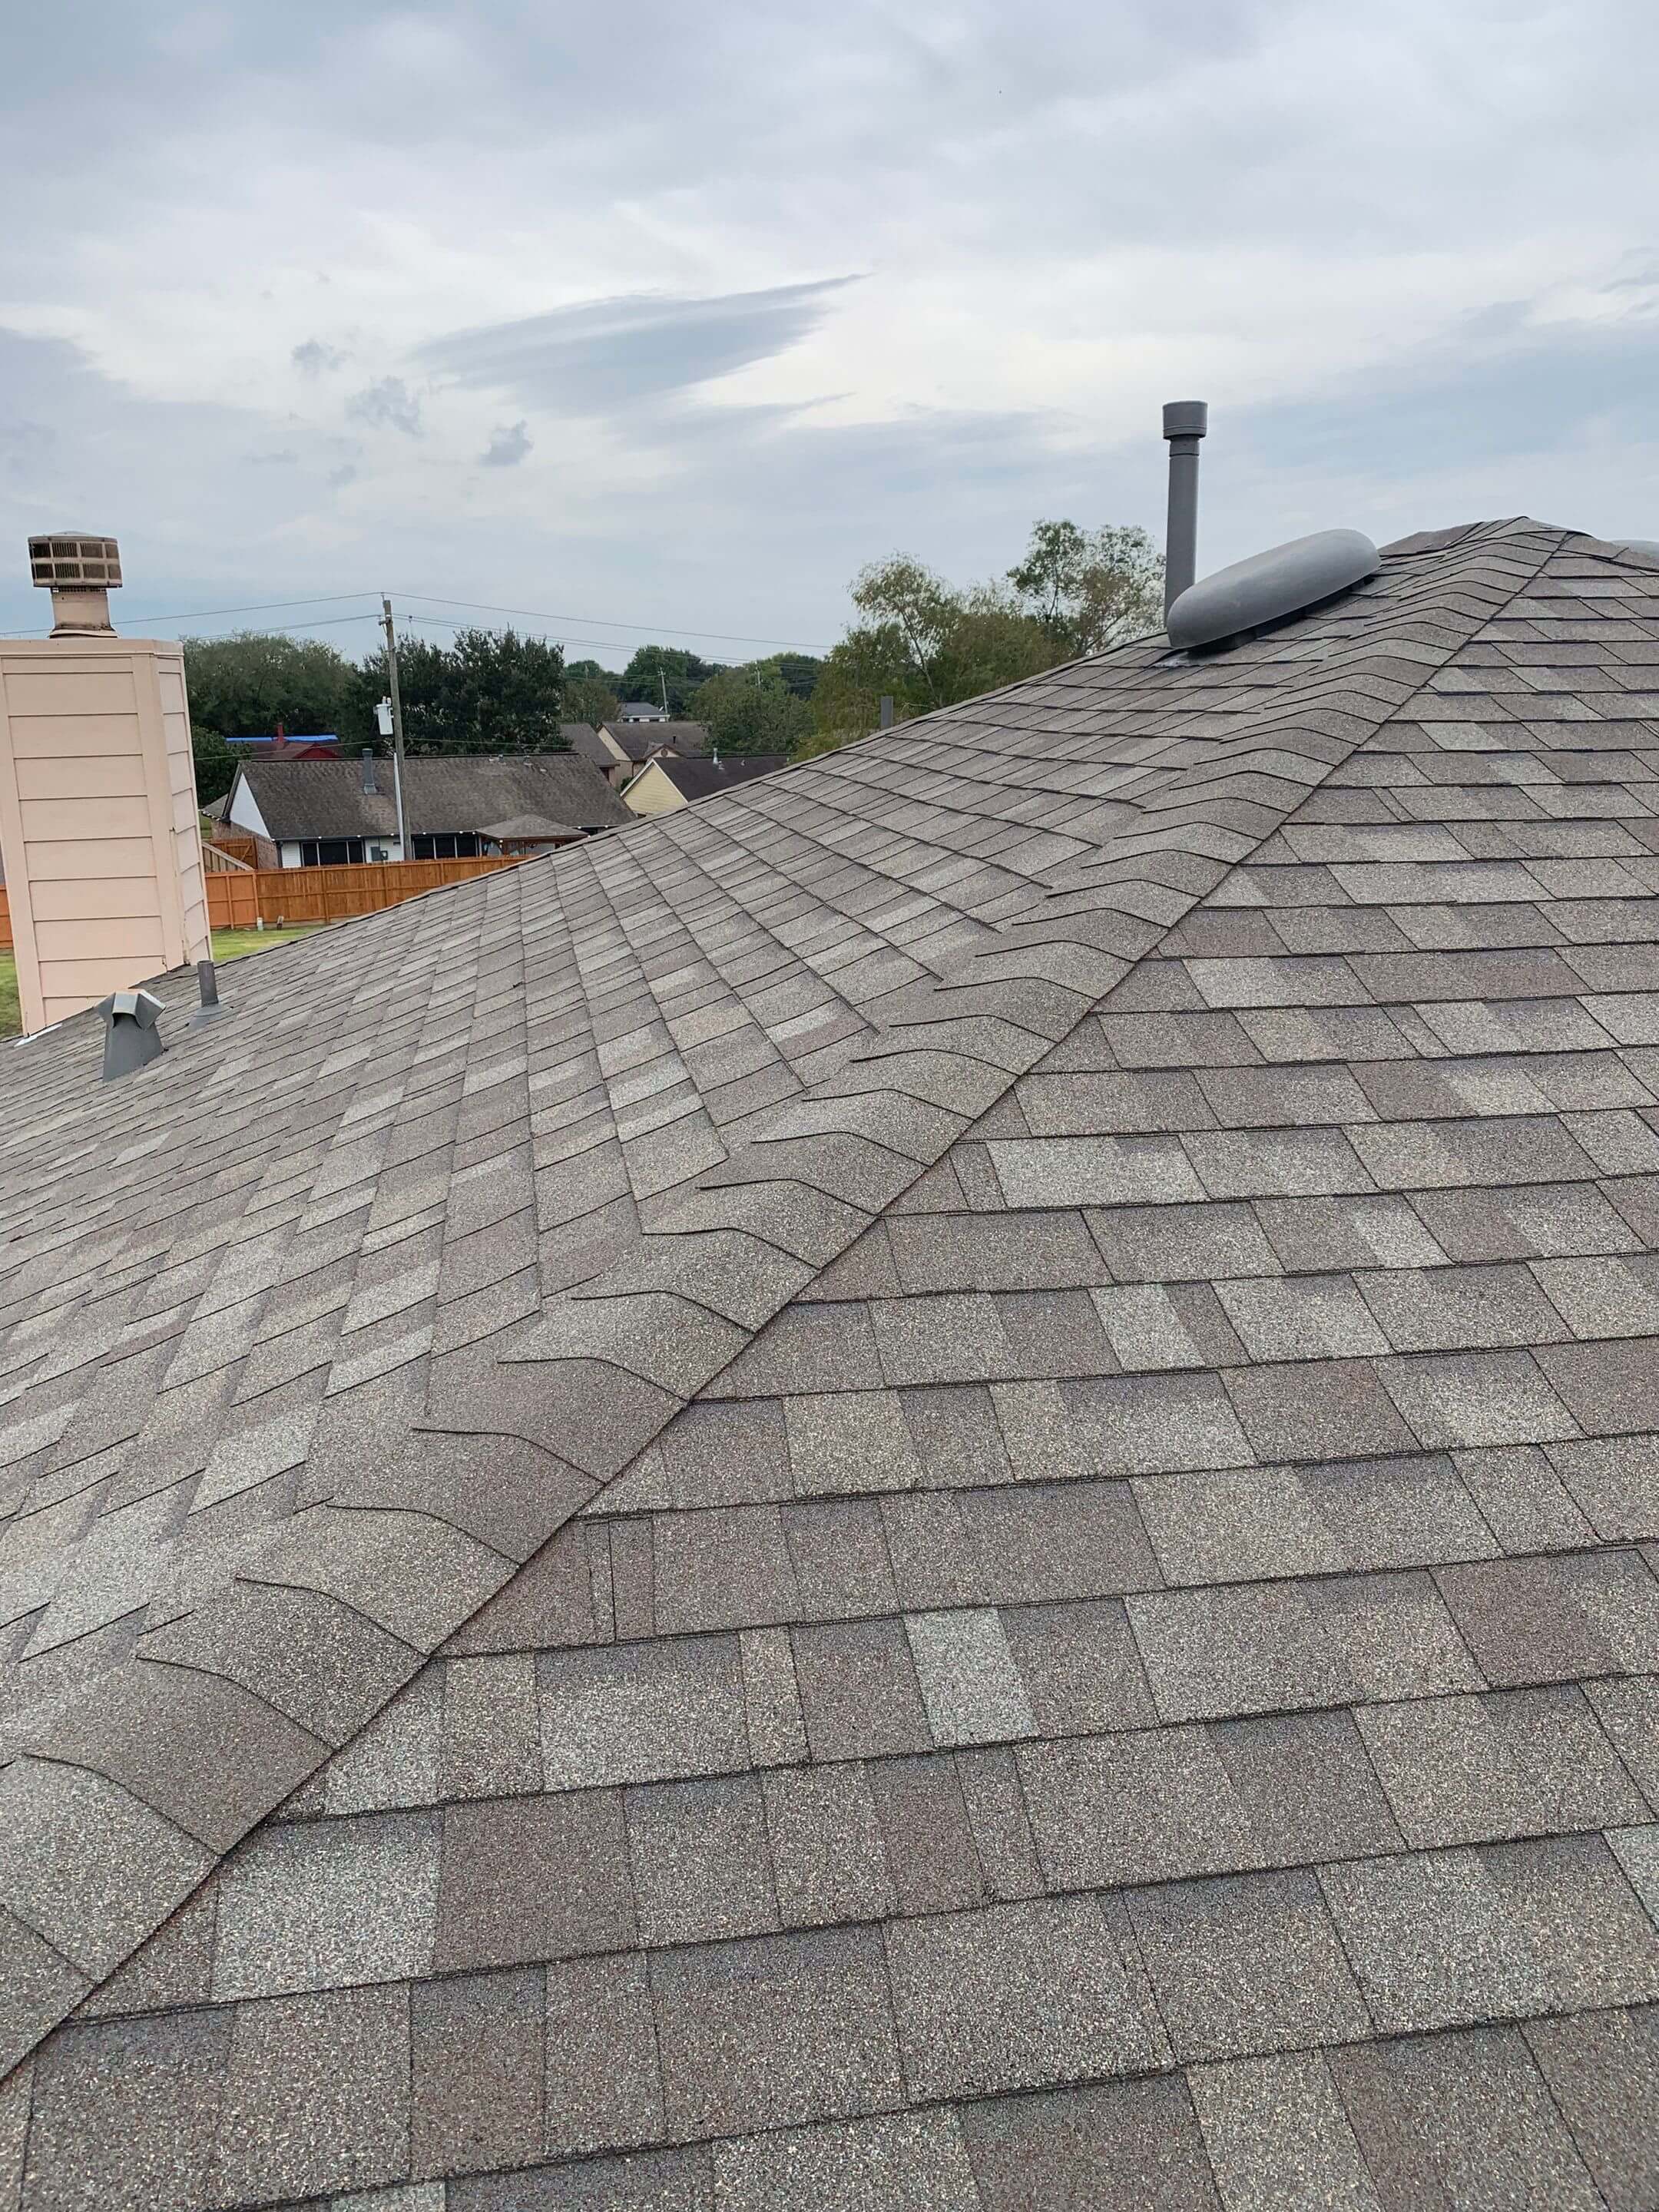 5 Tips about Metal Roof Summer Maintenance